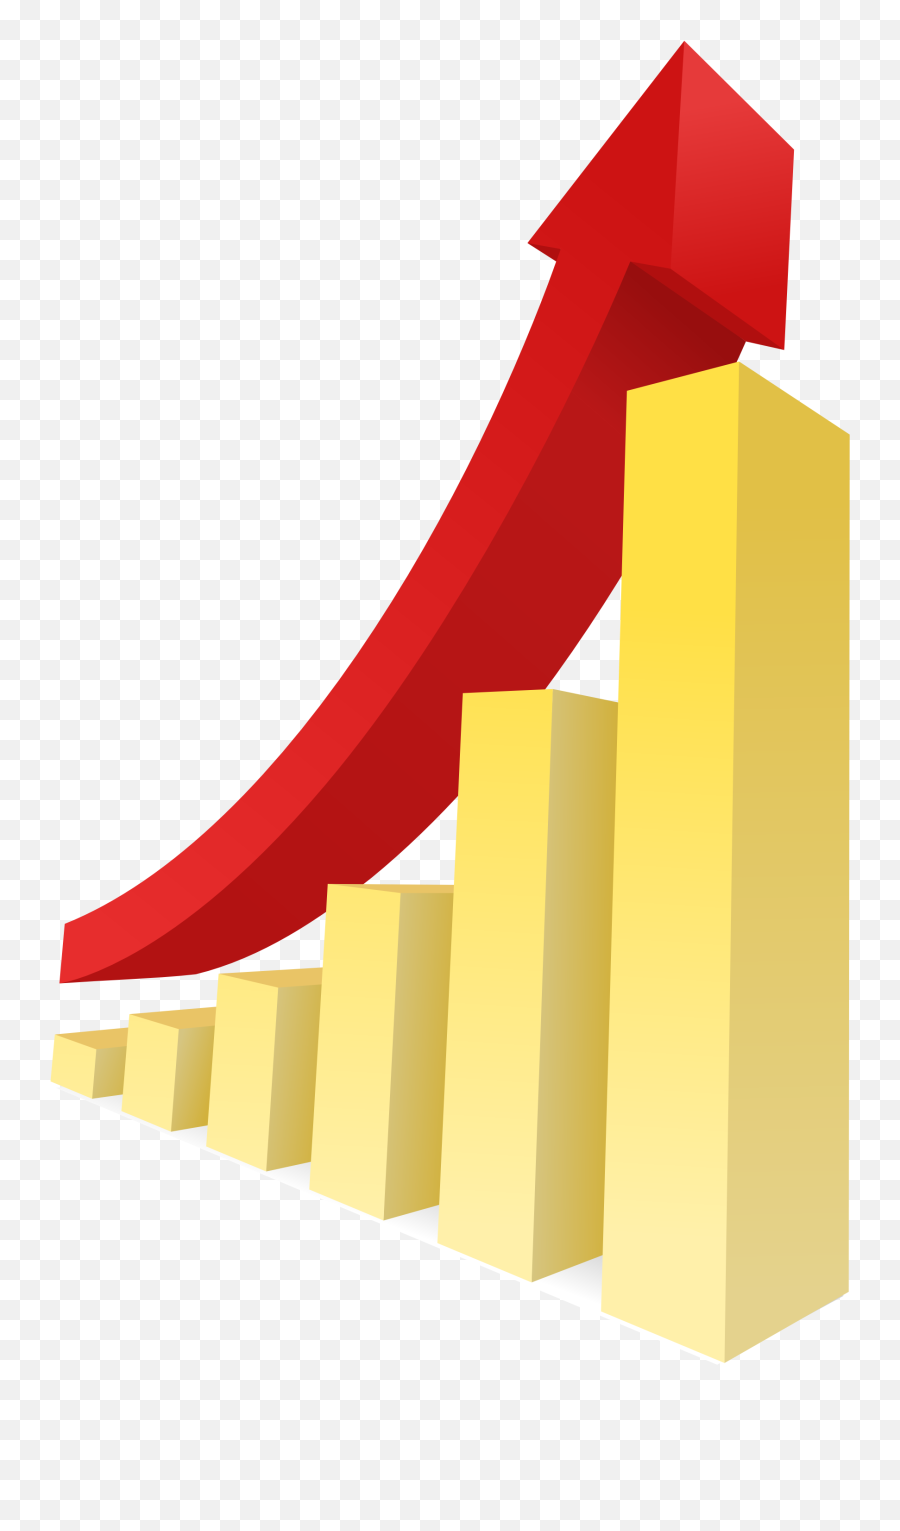 Download Stock Market Graph Up Image Hq Png Image Freepngimg - Clipart Stock Market Emoji,Graph Png